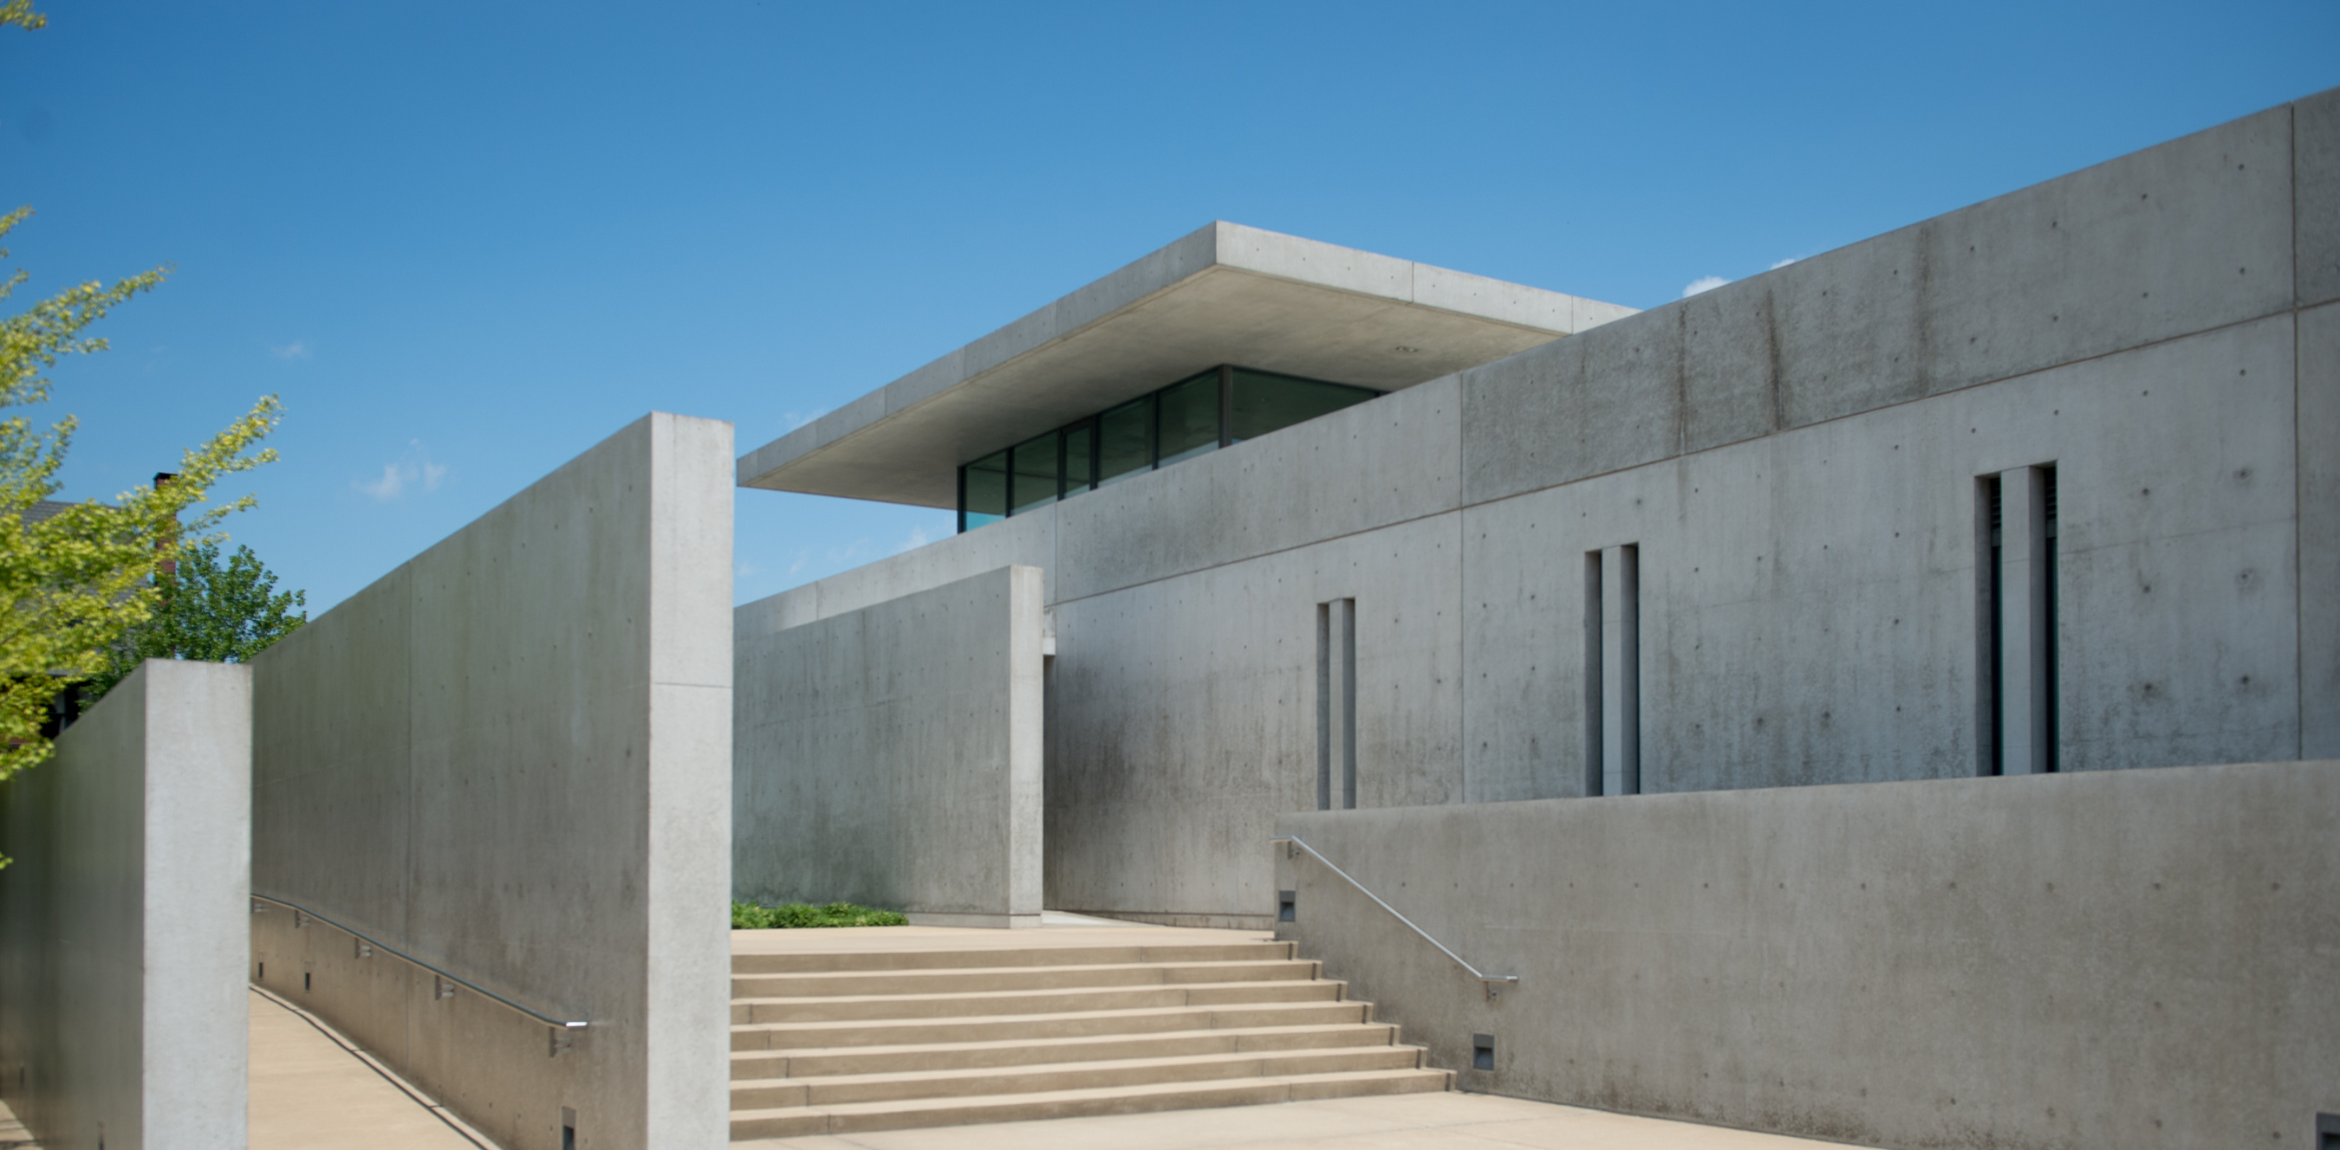 This image shows a modern, minimalist concrete building designed with clean lines and geometric shapes. The structure features a flat roof and narrow vertical windows. A set of stairs leads up to the main entrance, flanked by tall concrete walls. The building's aesthetic is characterized by the use of exposed concrete and an emphasis on simplicity and functionality. A small strip of greenery is visible on the left side, adding a touch of nature to the otherwise stark architectural design. The sky is clear and blue, providing a bright and clean backdrop for the building.